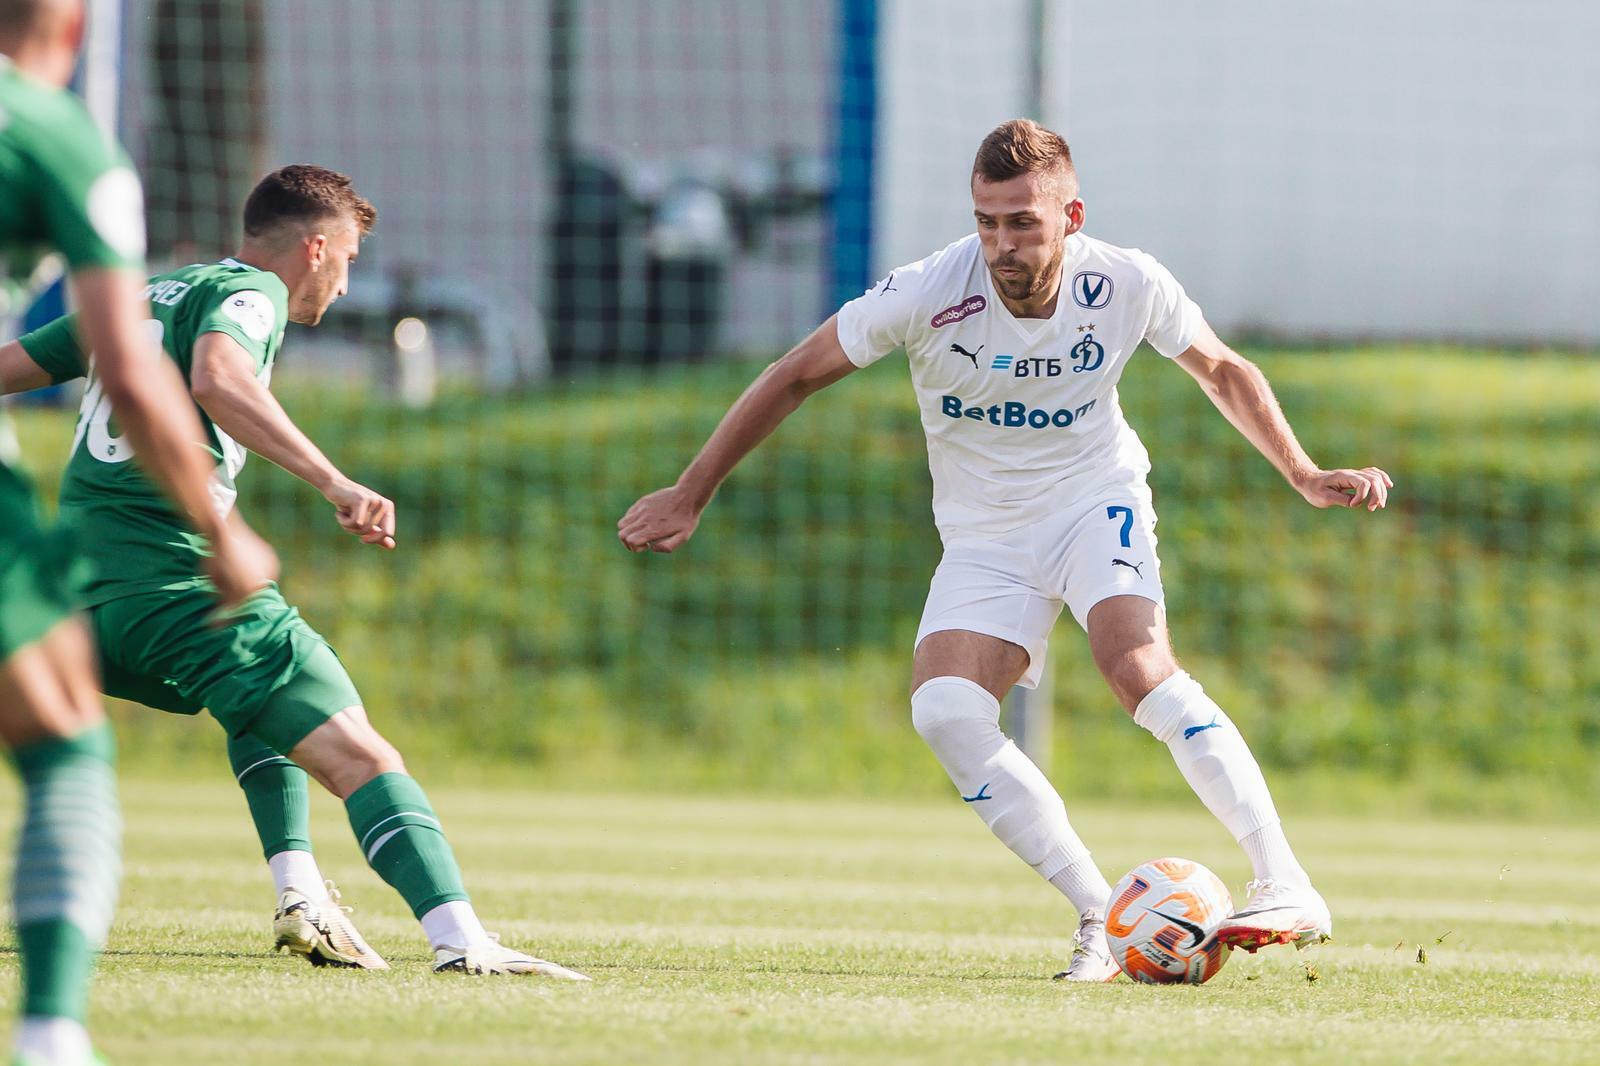 FC Dynamo Moscow News | Match Preview "Dynamo" vs "Partizan": where to watch, our news, getting to know the opponent. Official Dynamo club website.